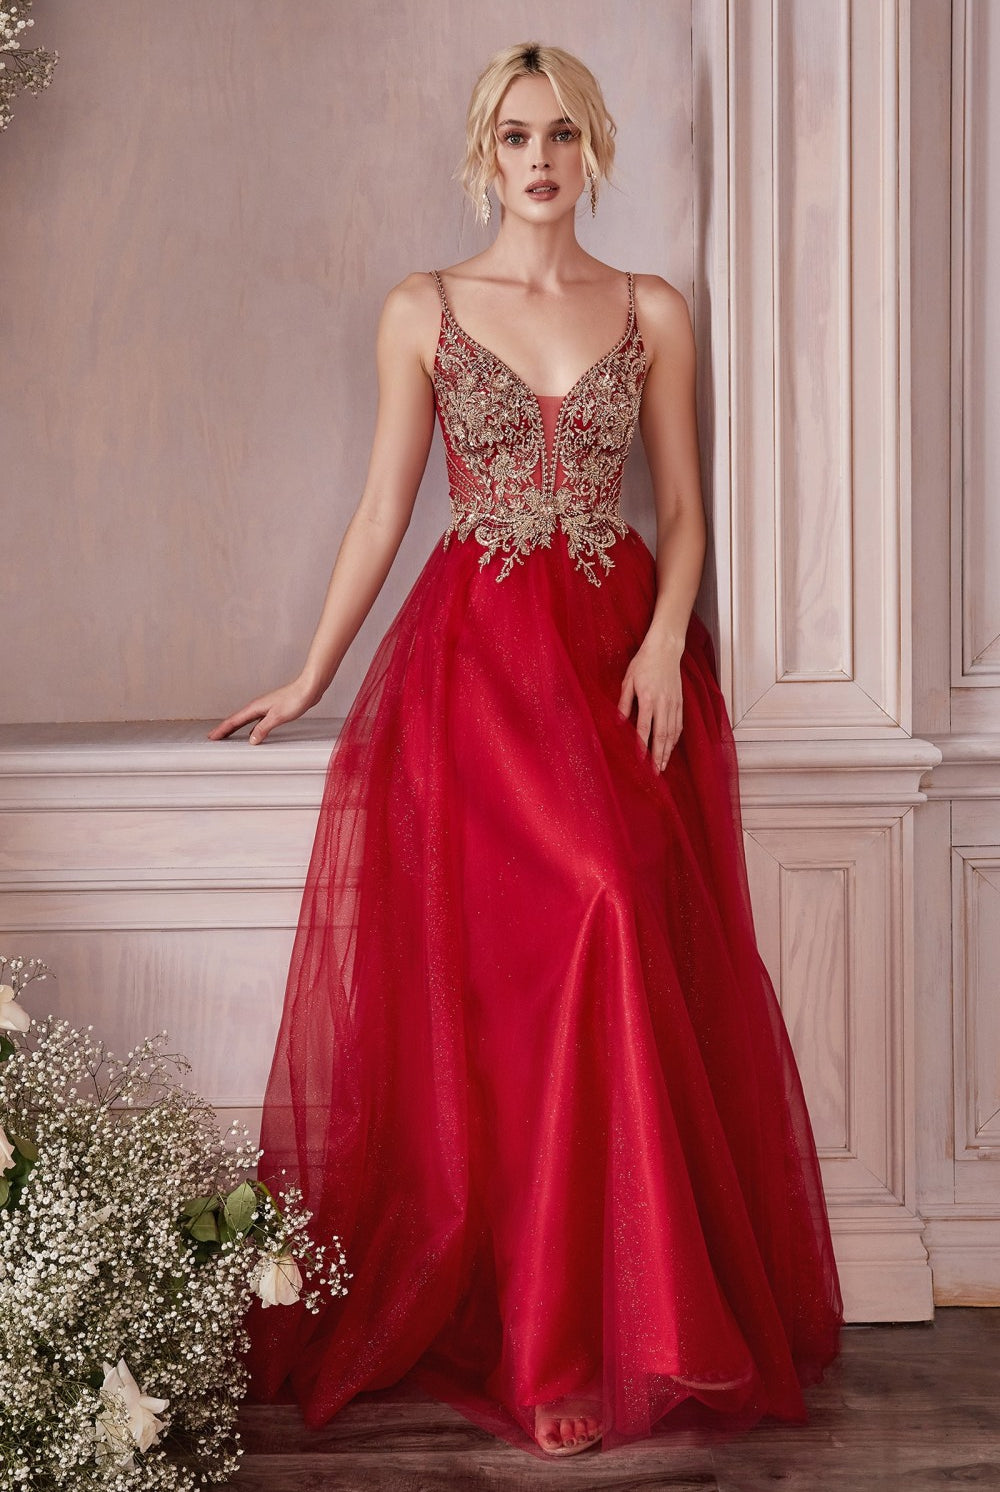 Layered Tulle A-Line Gown w/ Floral Laced V-neck & V- Back Bodice. Cute Vintage Evening Ball Dress-smcdress